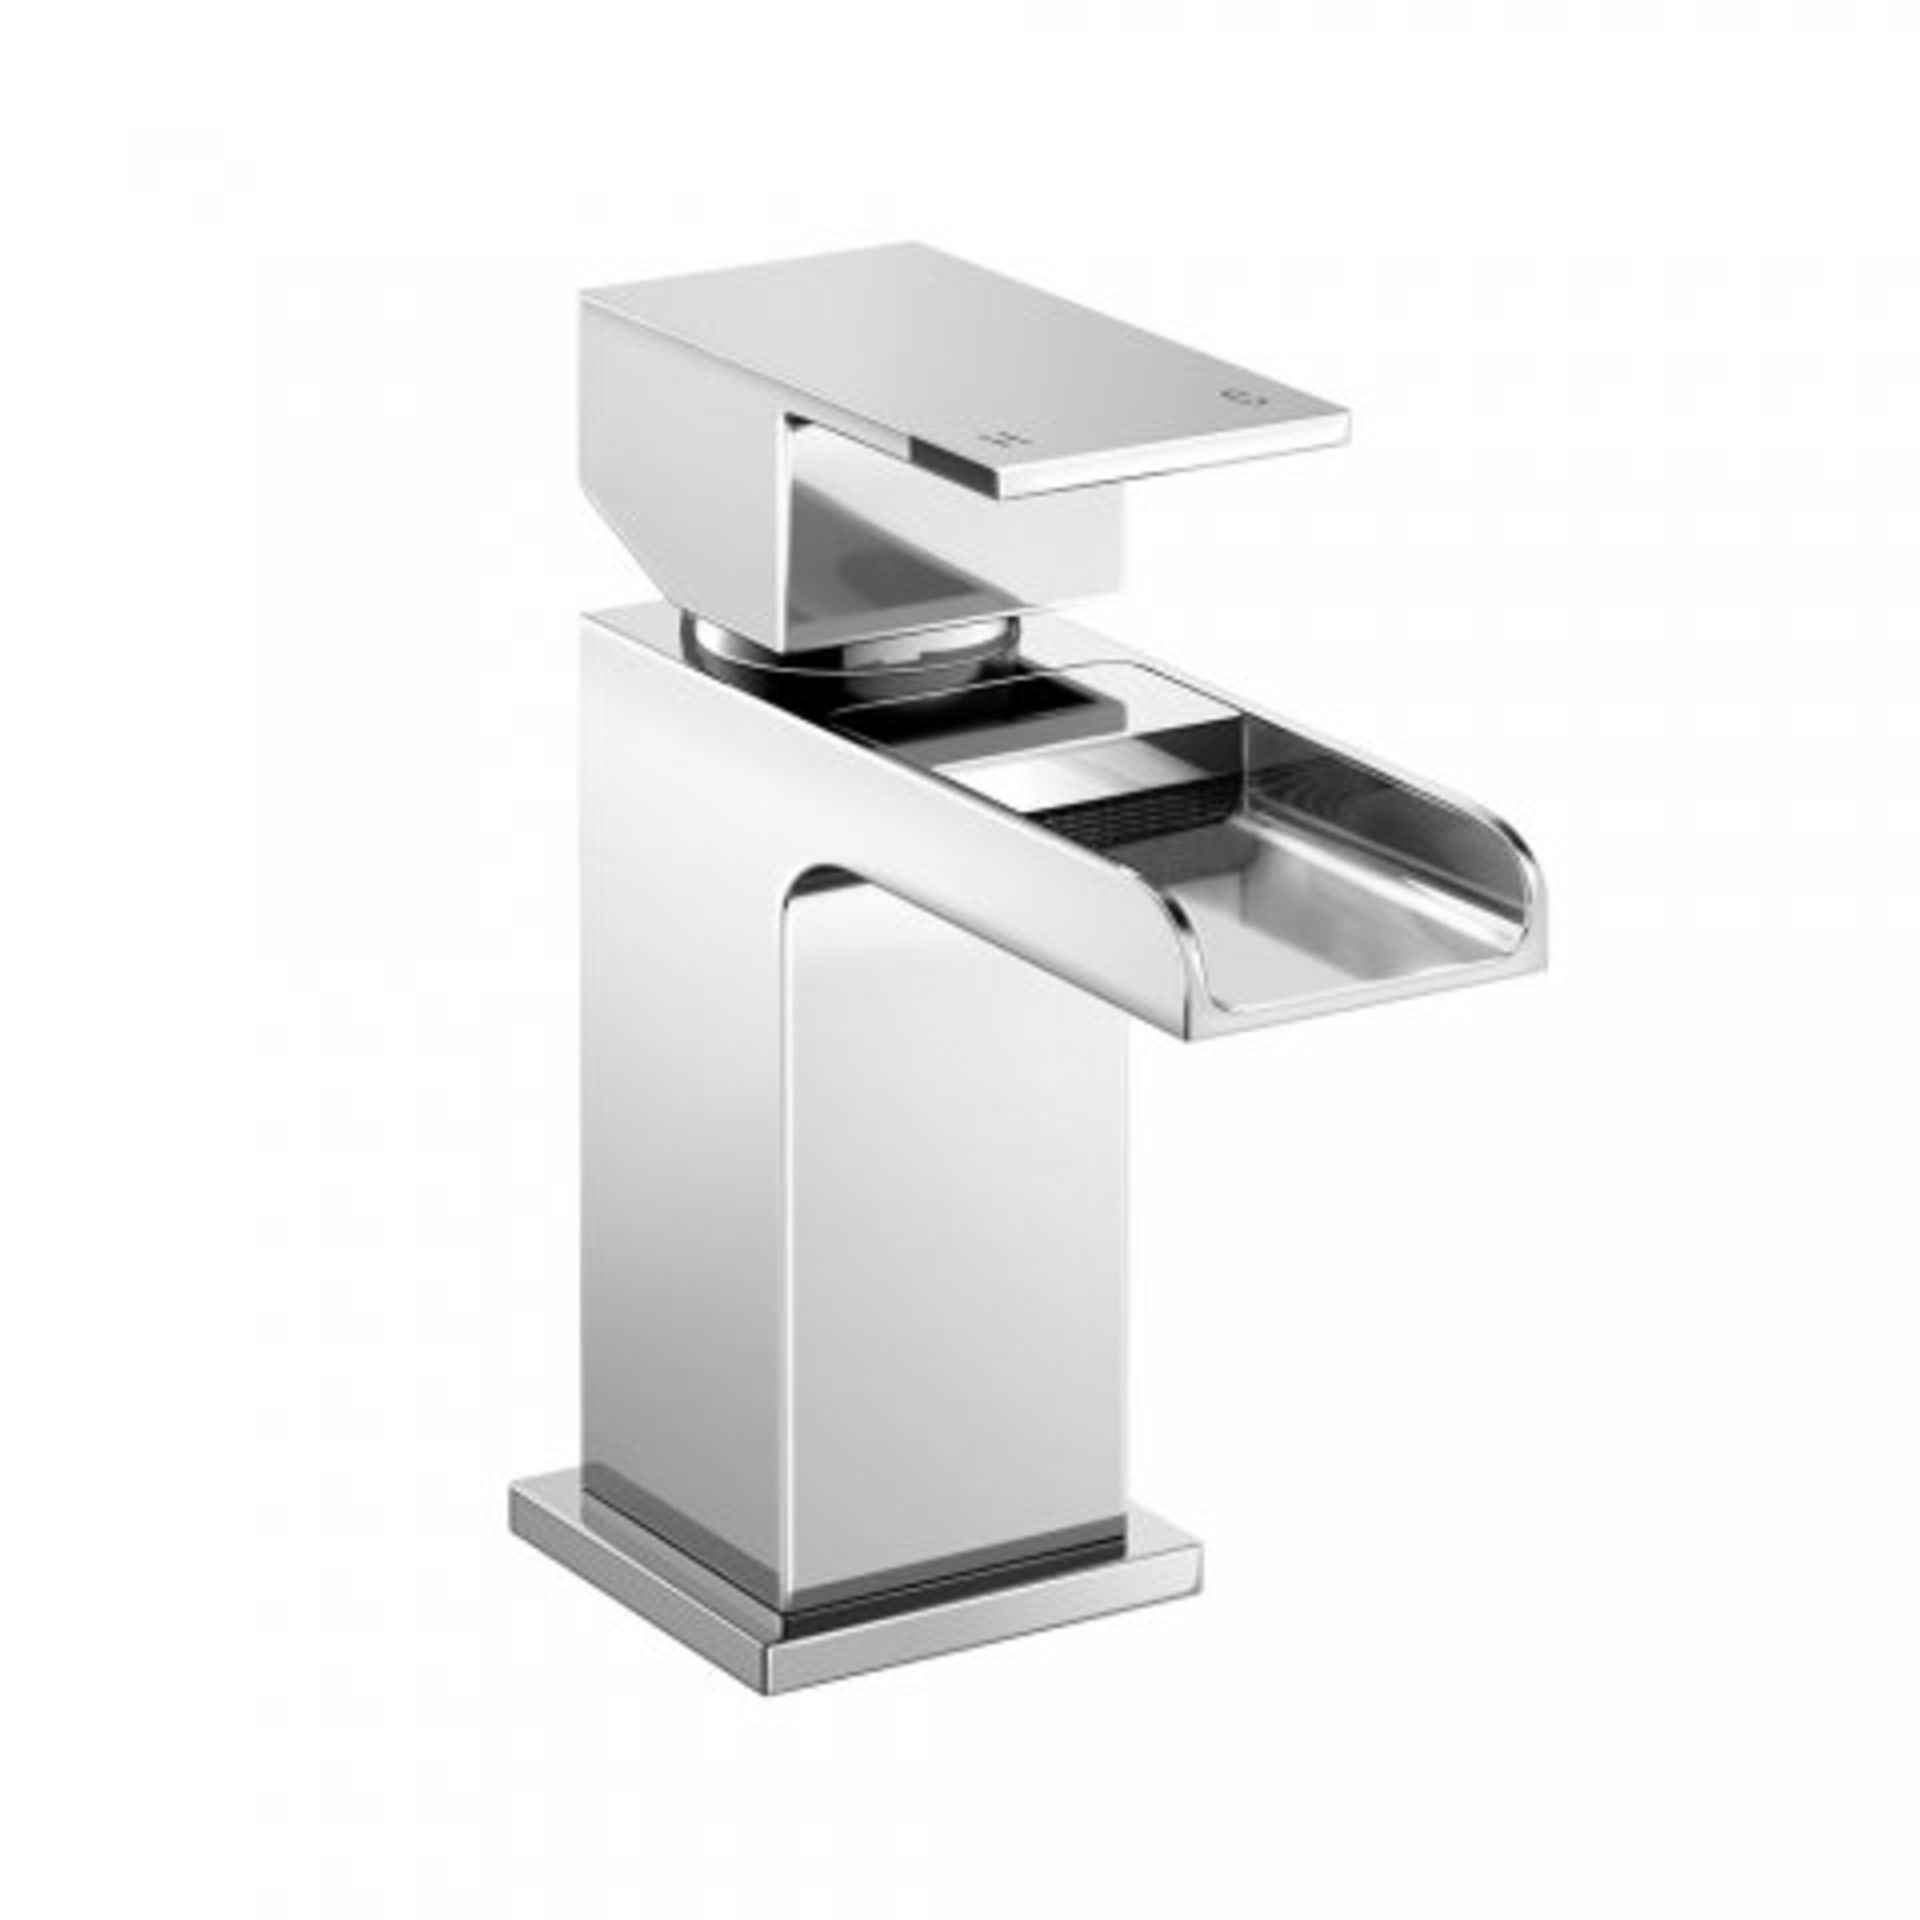 (I100) Niagra II Cloakroom Basin Mixer Tap Waterfall Feature Our range of waterfall taps add a - Image 3 of 3